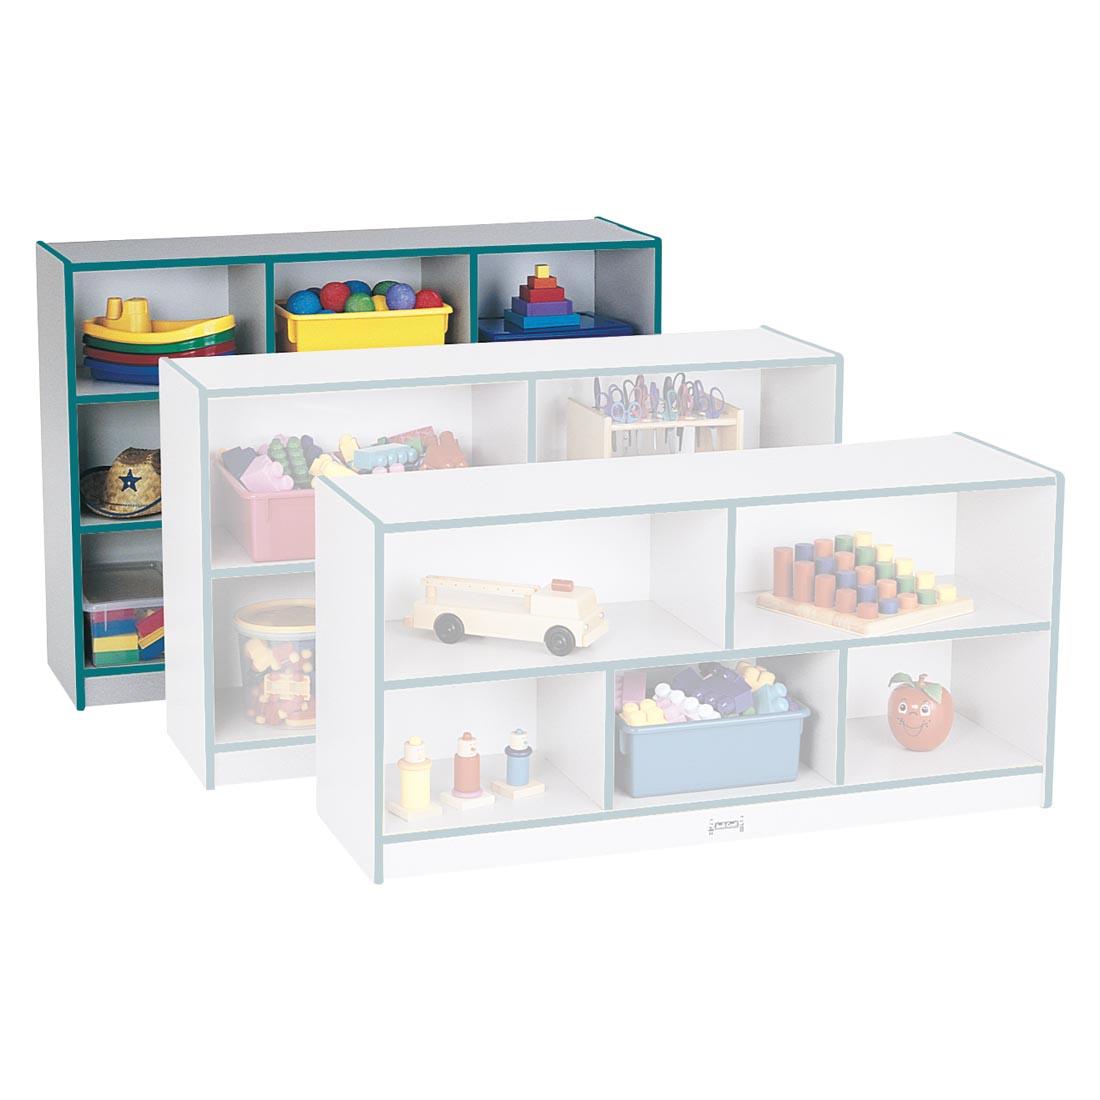 Rainbow Accents Teal Edge Single Mobile Storage Unit Super-Sized Height with two shelves in front of it to show scale